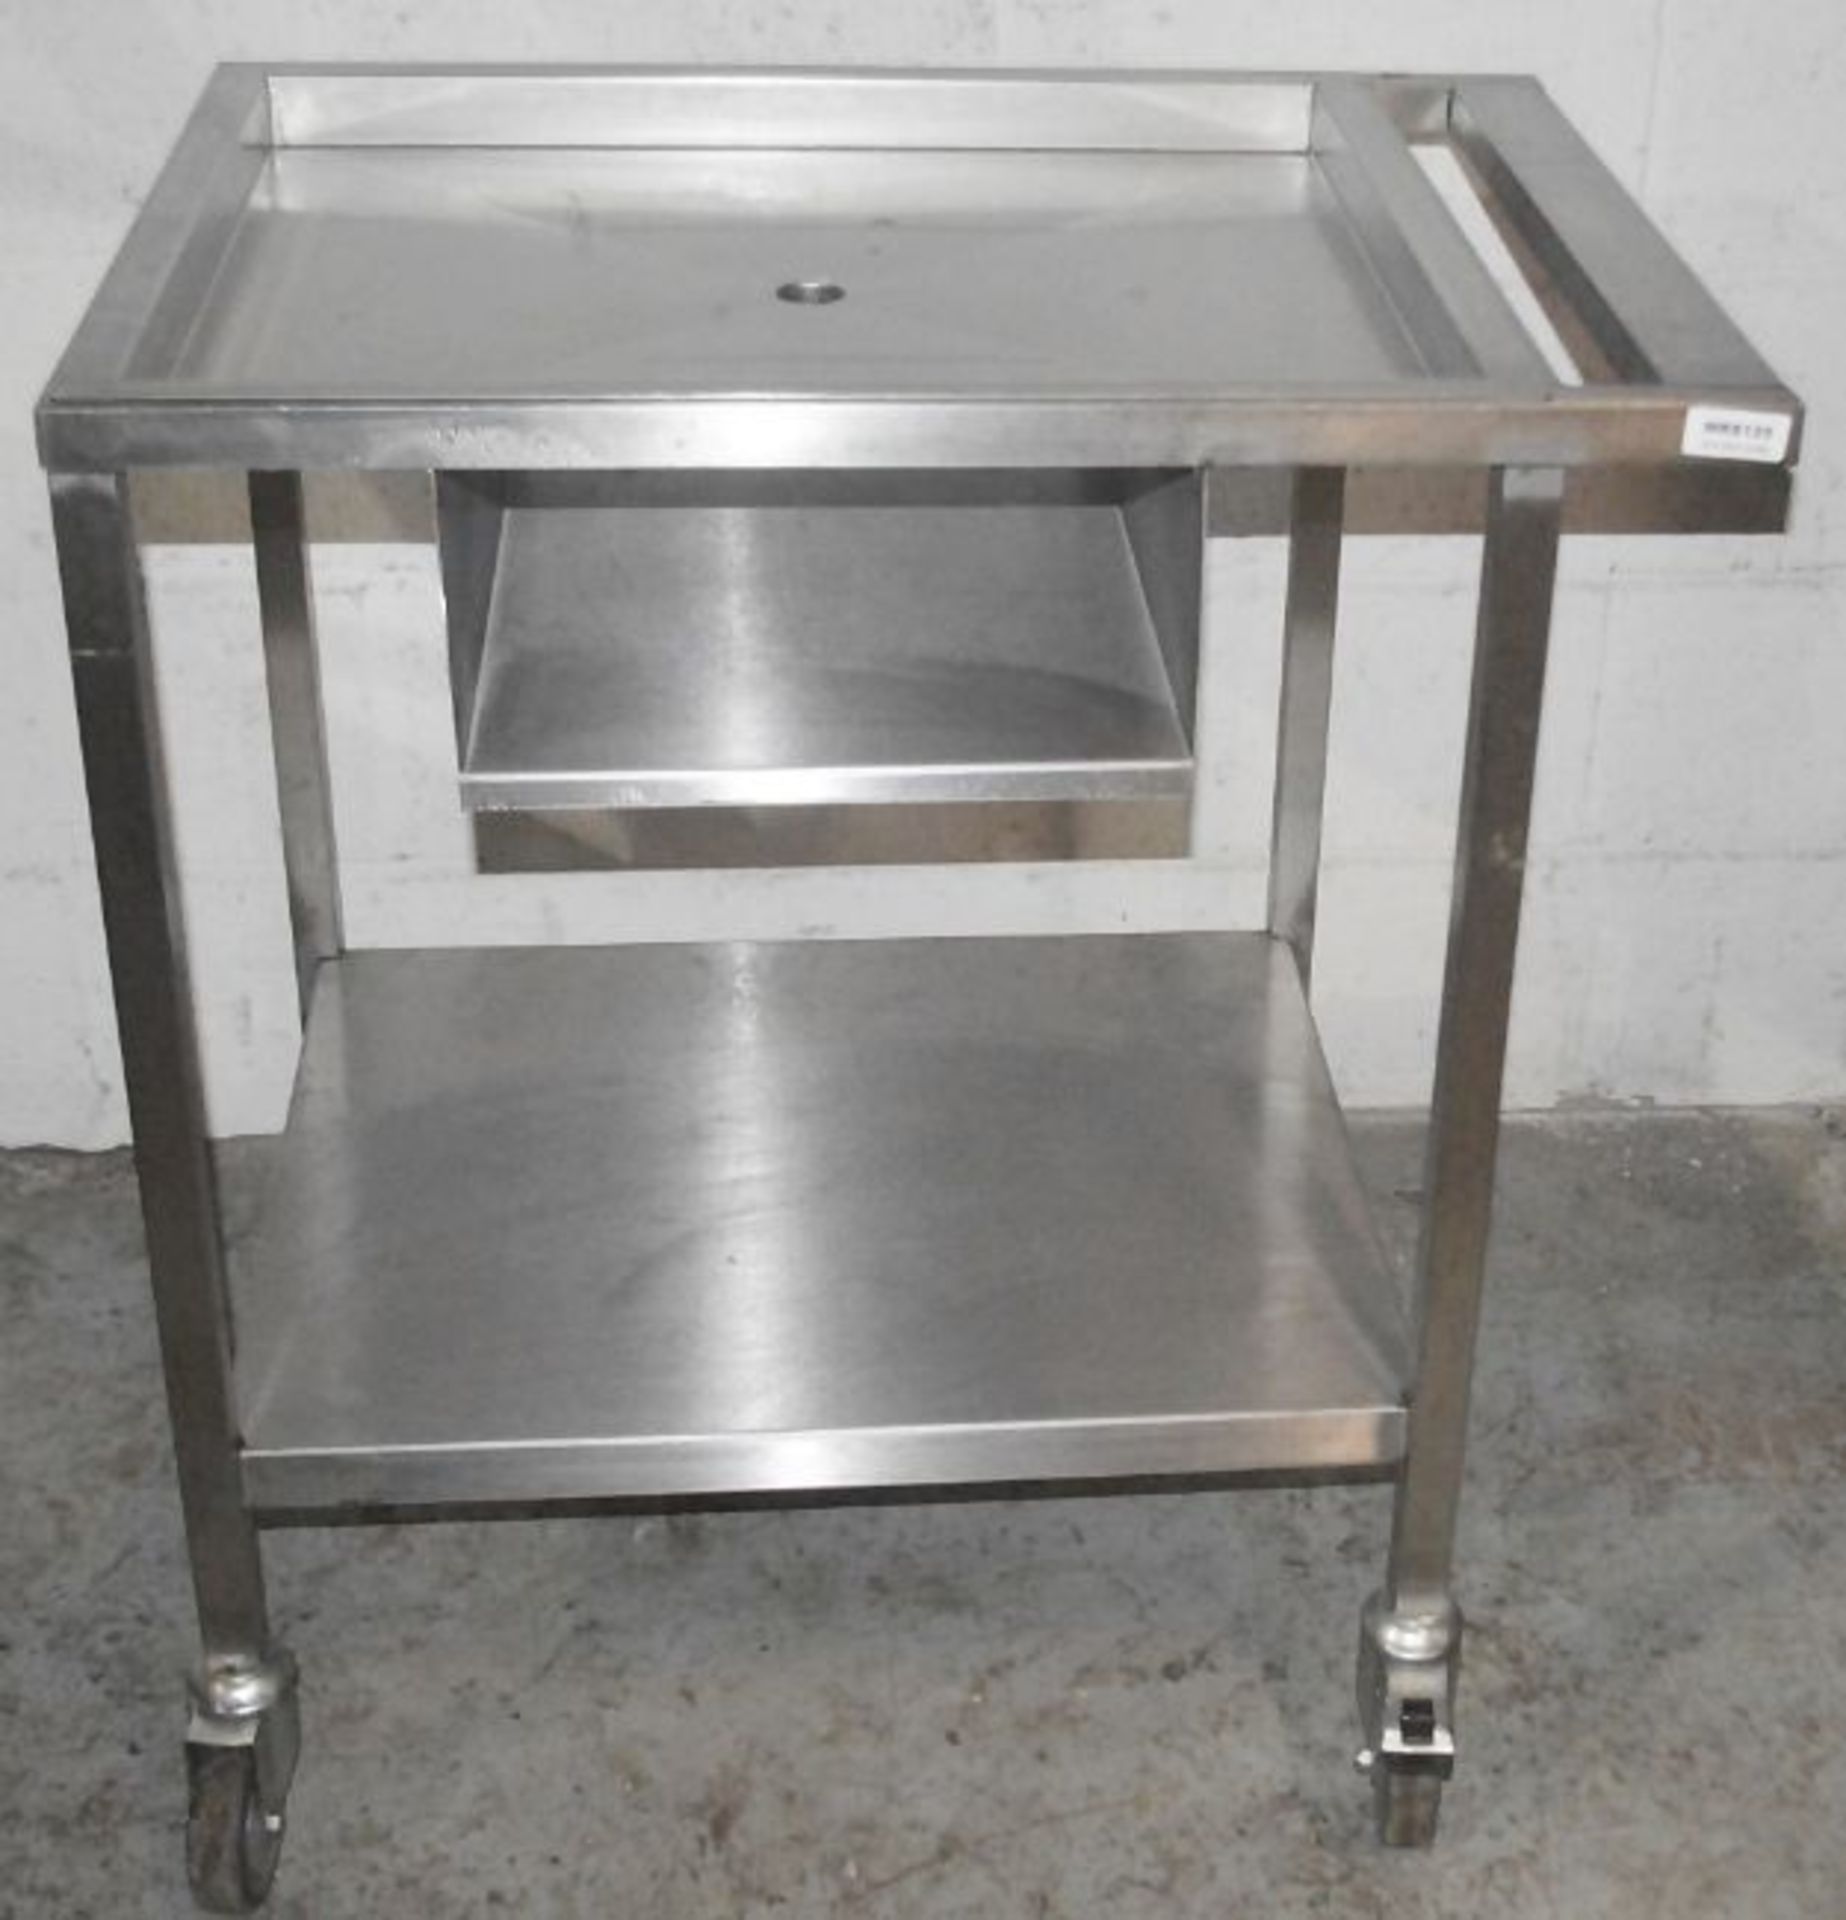 1 x Stainless Steel Commercial Kitchen Spooling Table - Dimensions: H88 x W80 x D61cm - Very - Image 3 of 3